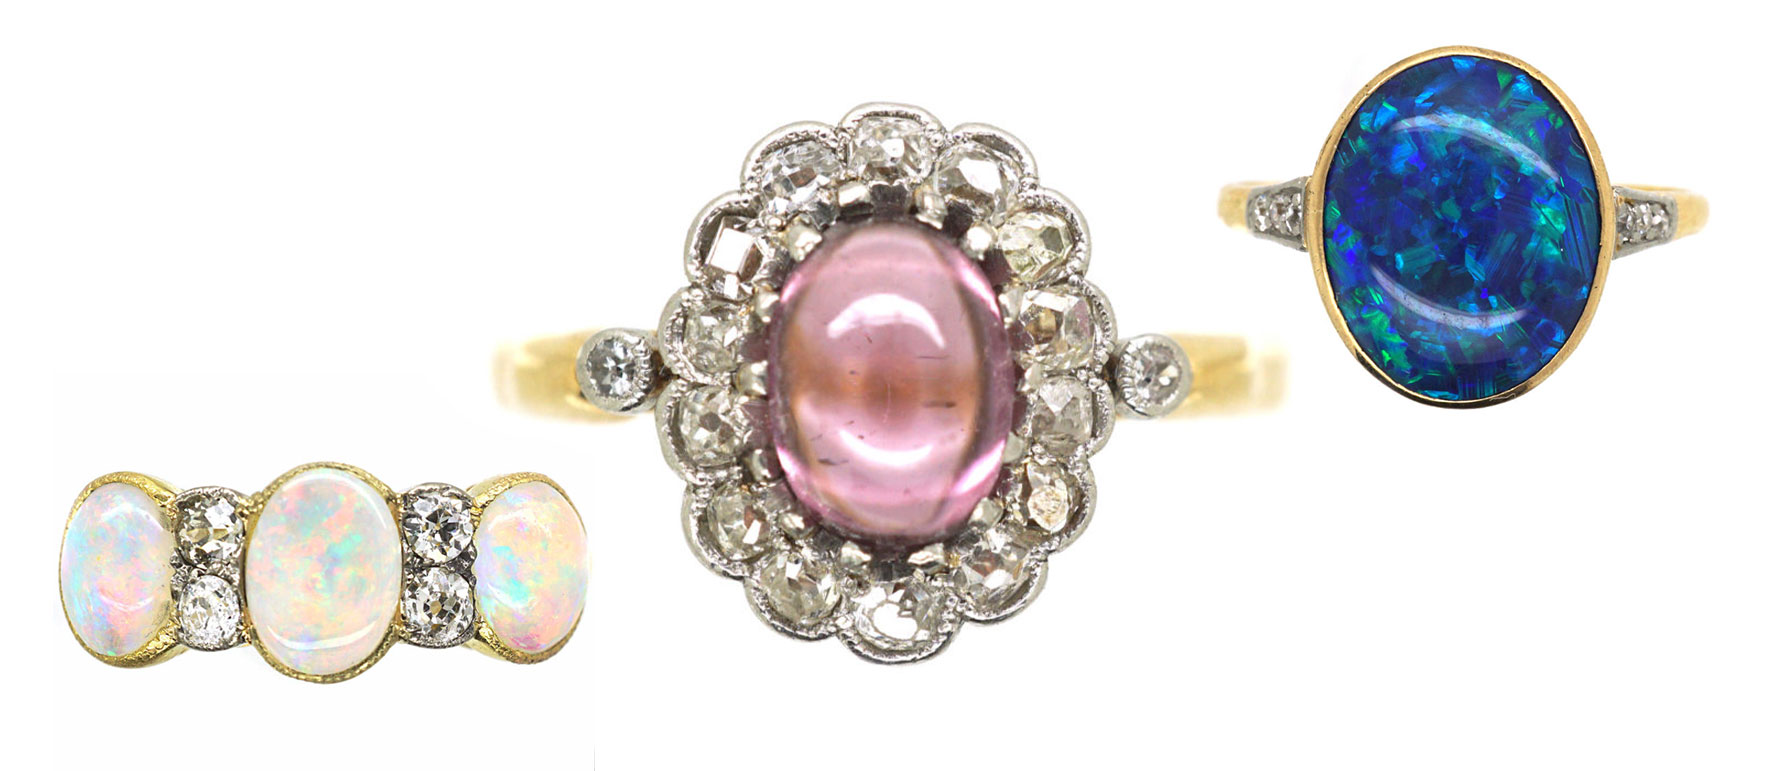 Antique tourmaline and opal rings